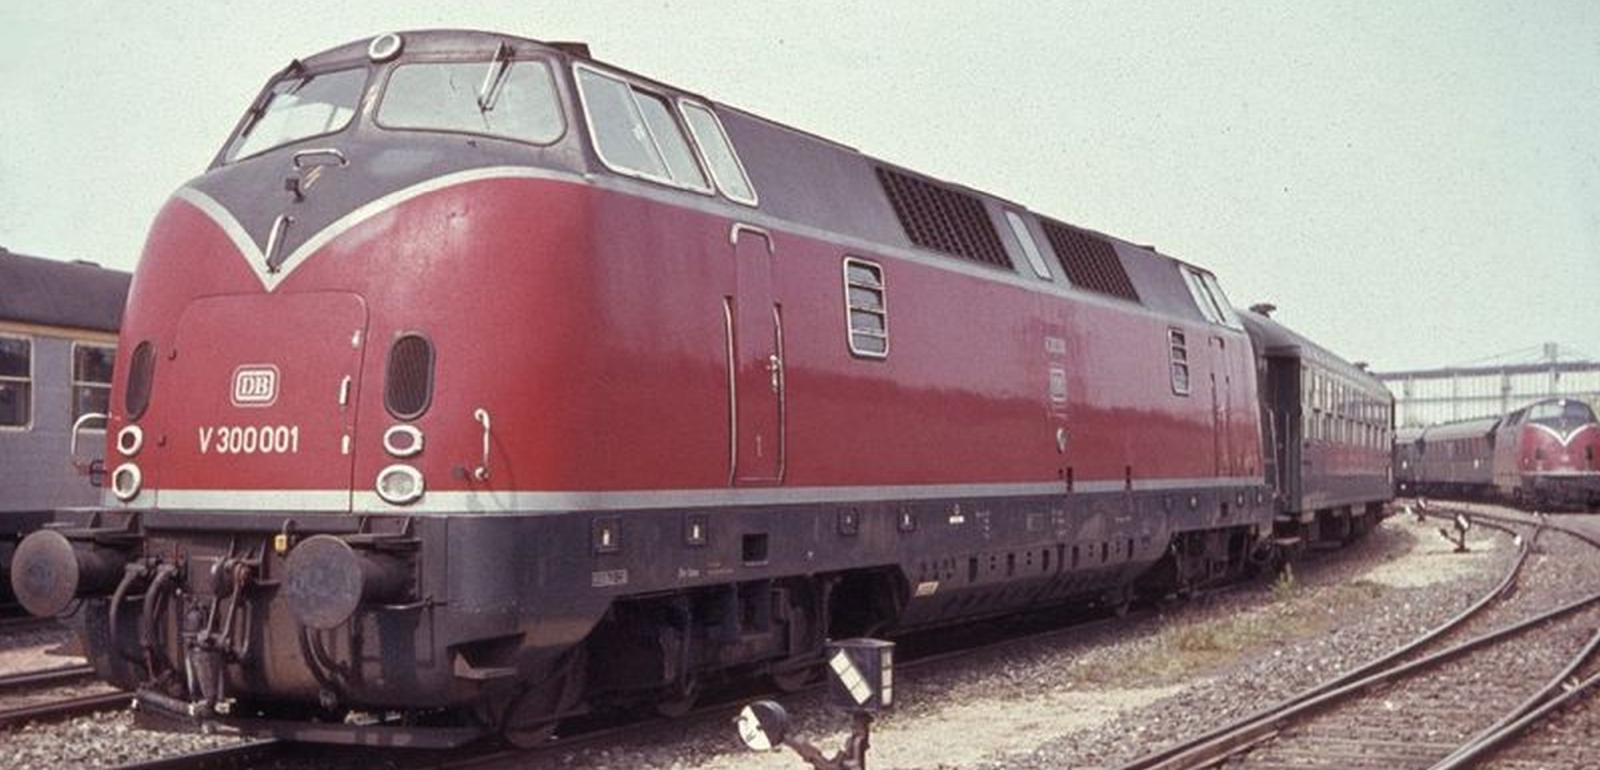 V 300 001 before being redesignated as class 230